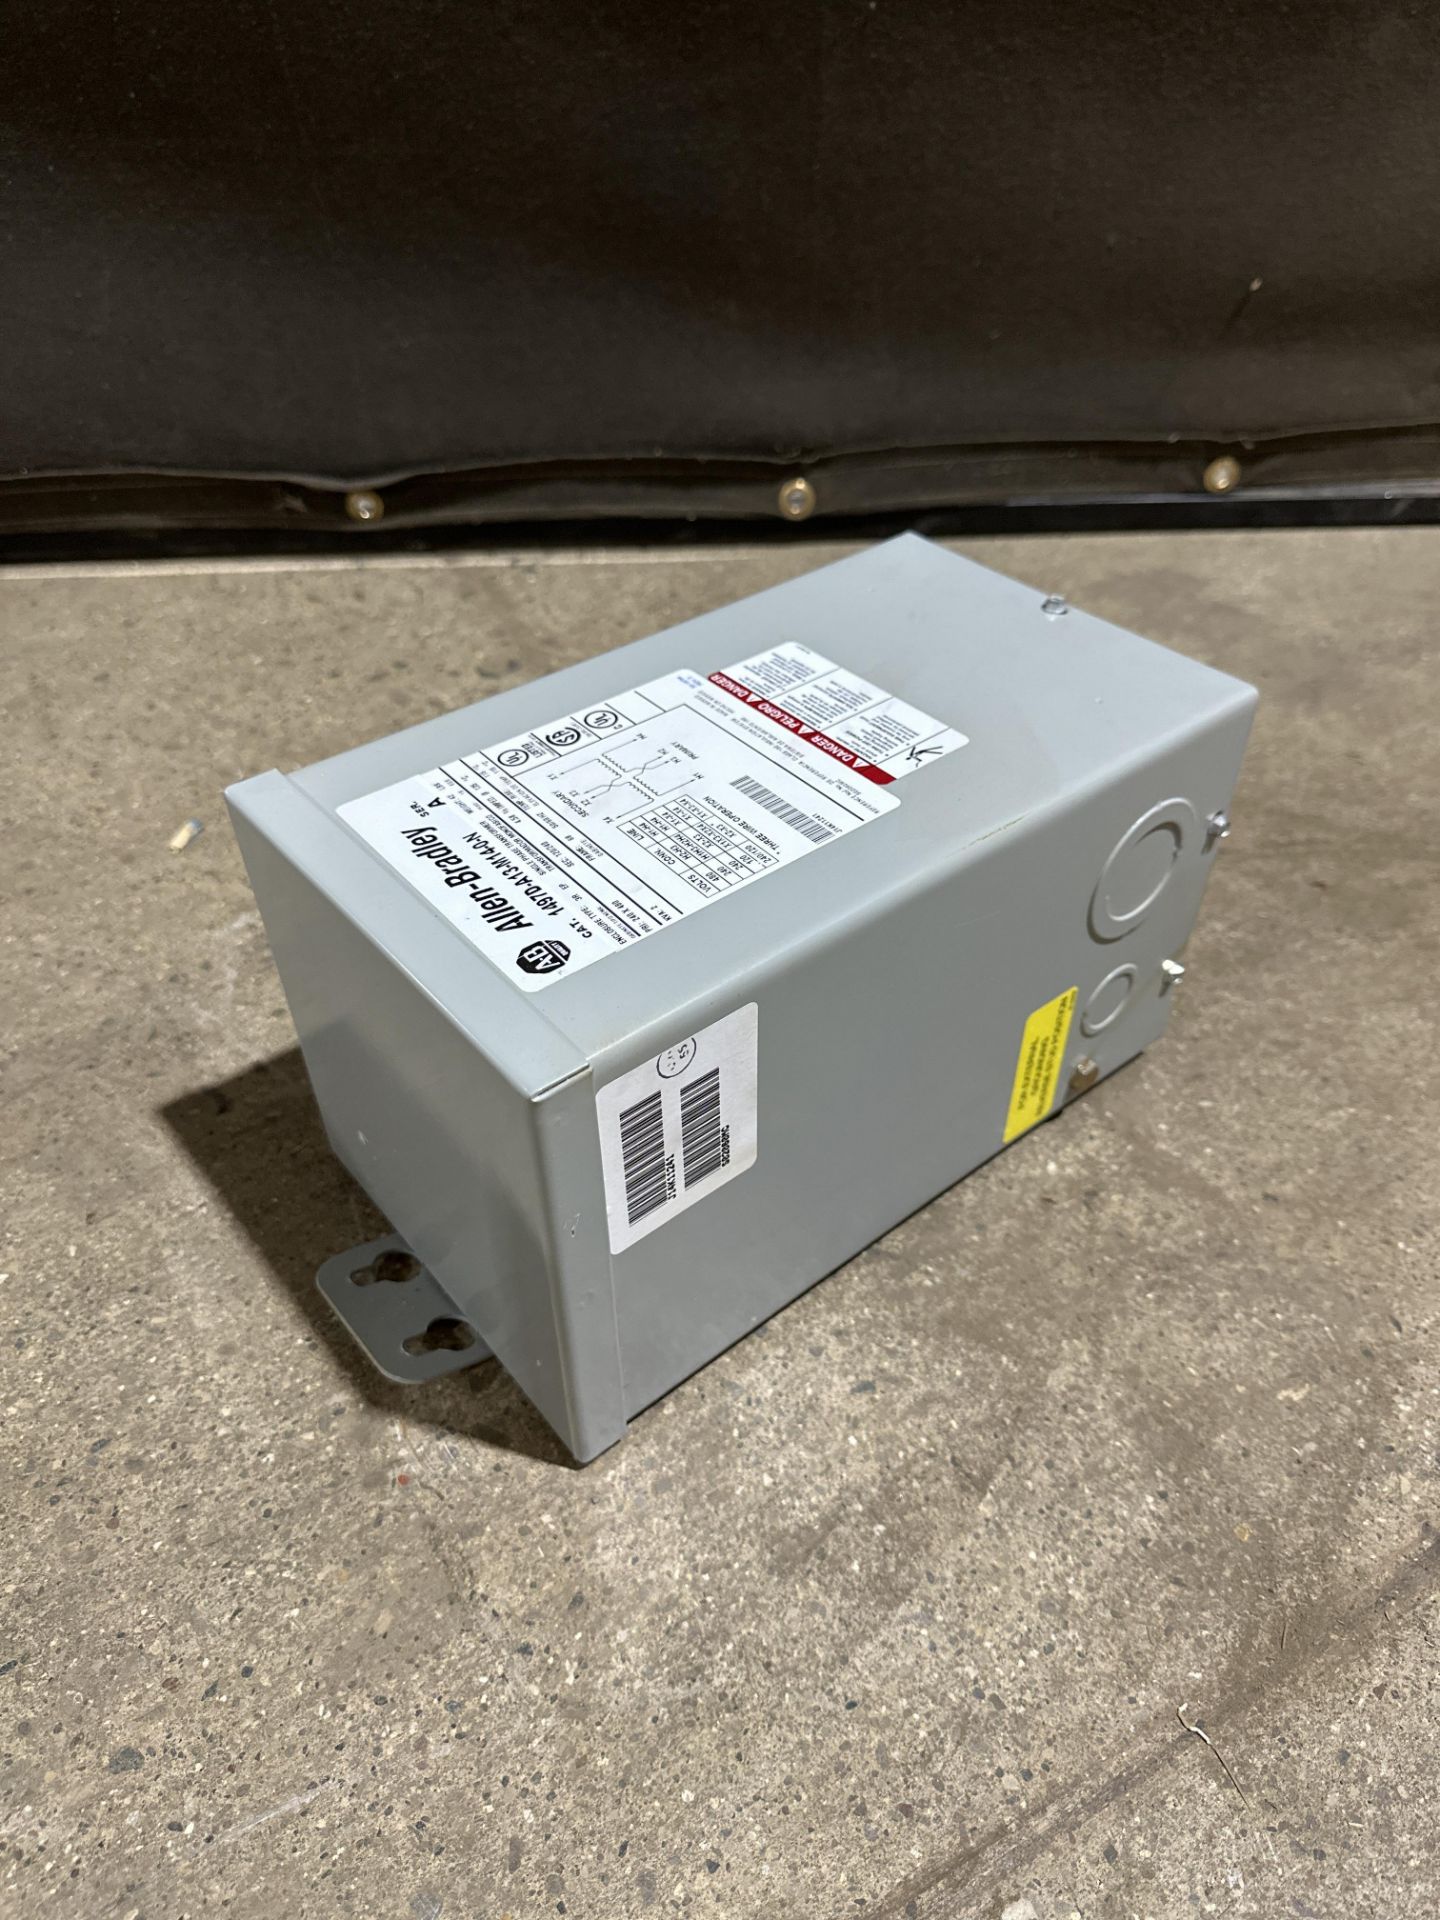 NEW IN BOX ALLEN BRADLEY 1479D-A13-M14-0-N TRANSFORMER 240/480 PRIMARY 120/240 SECONDARY 2 KVA - Image 6 of 6